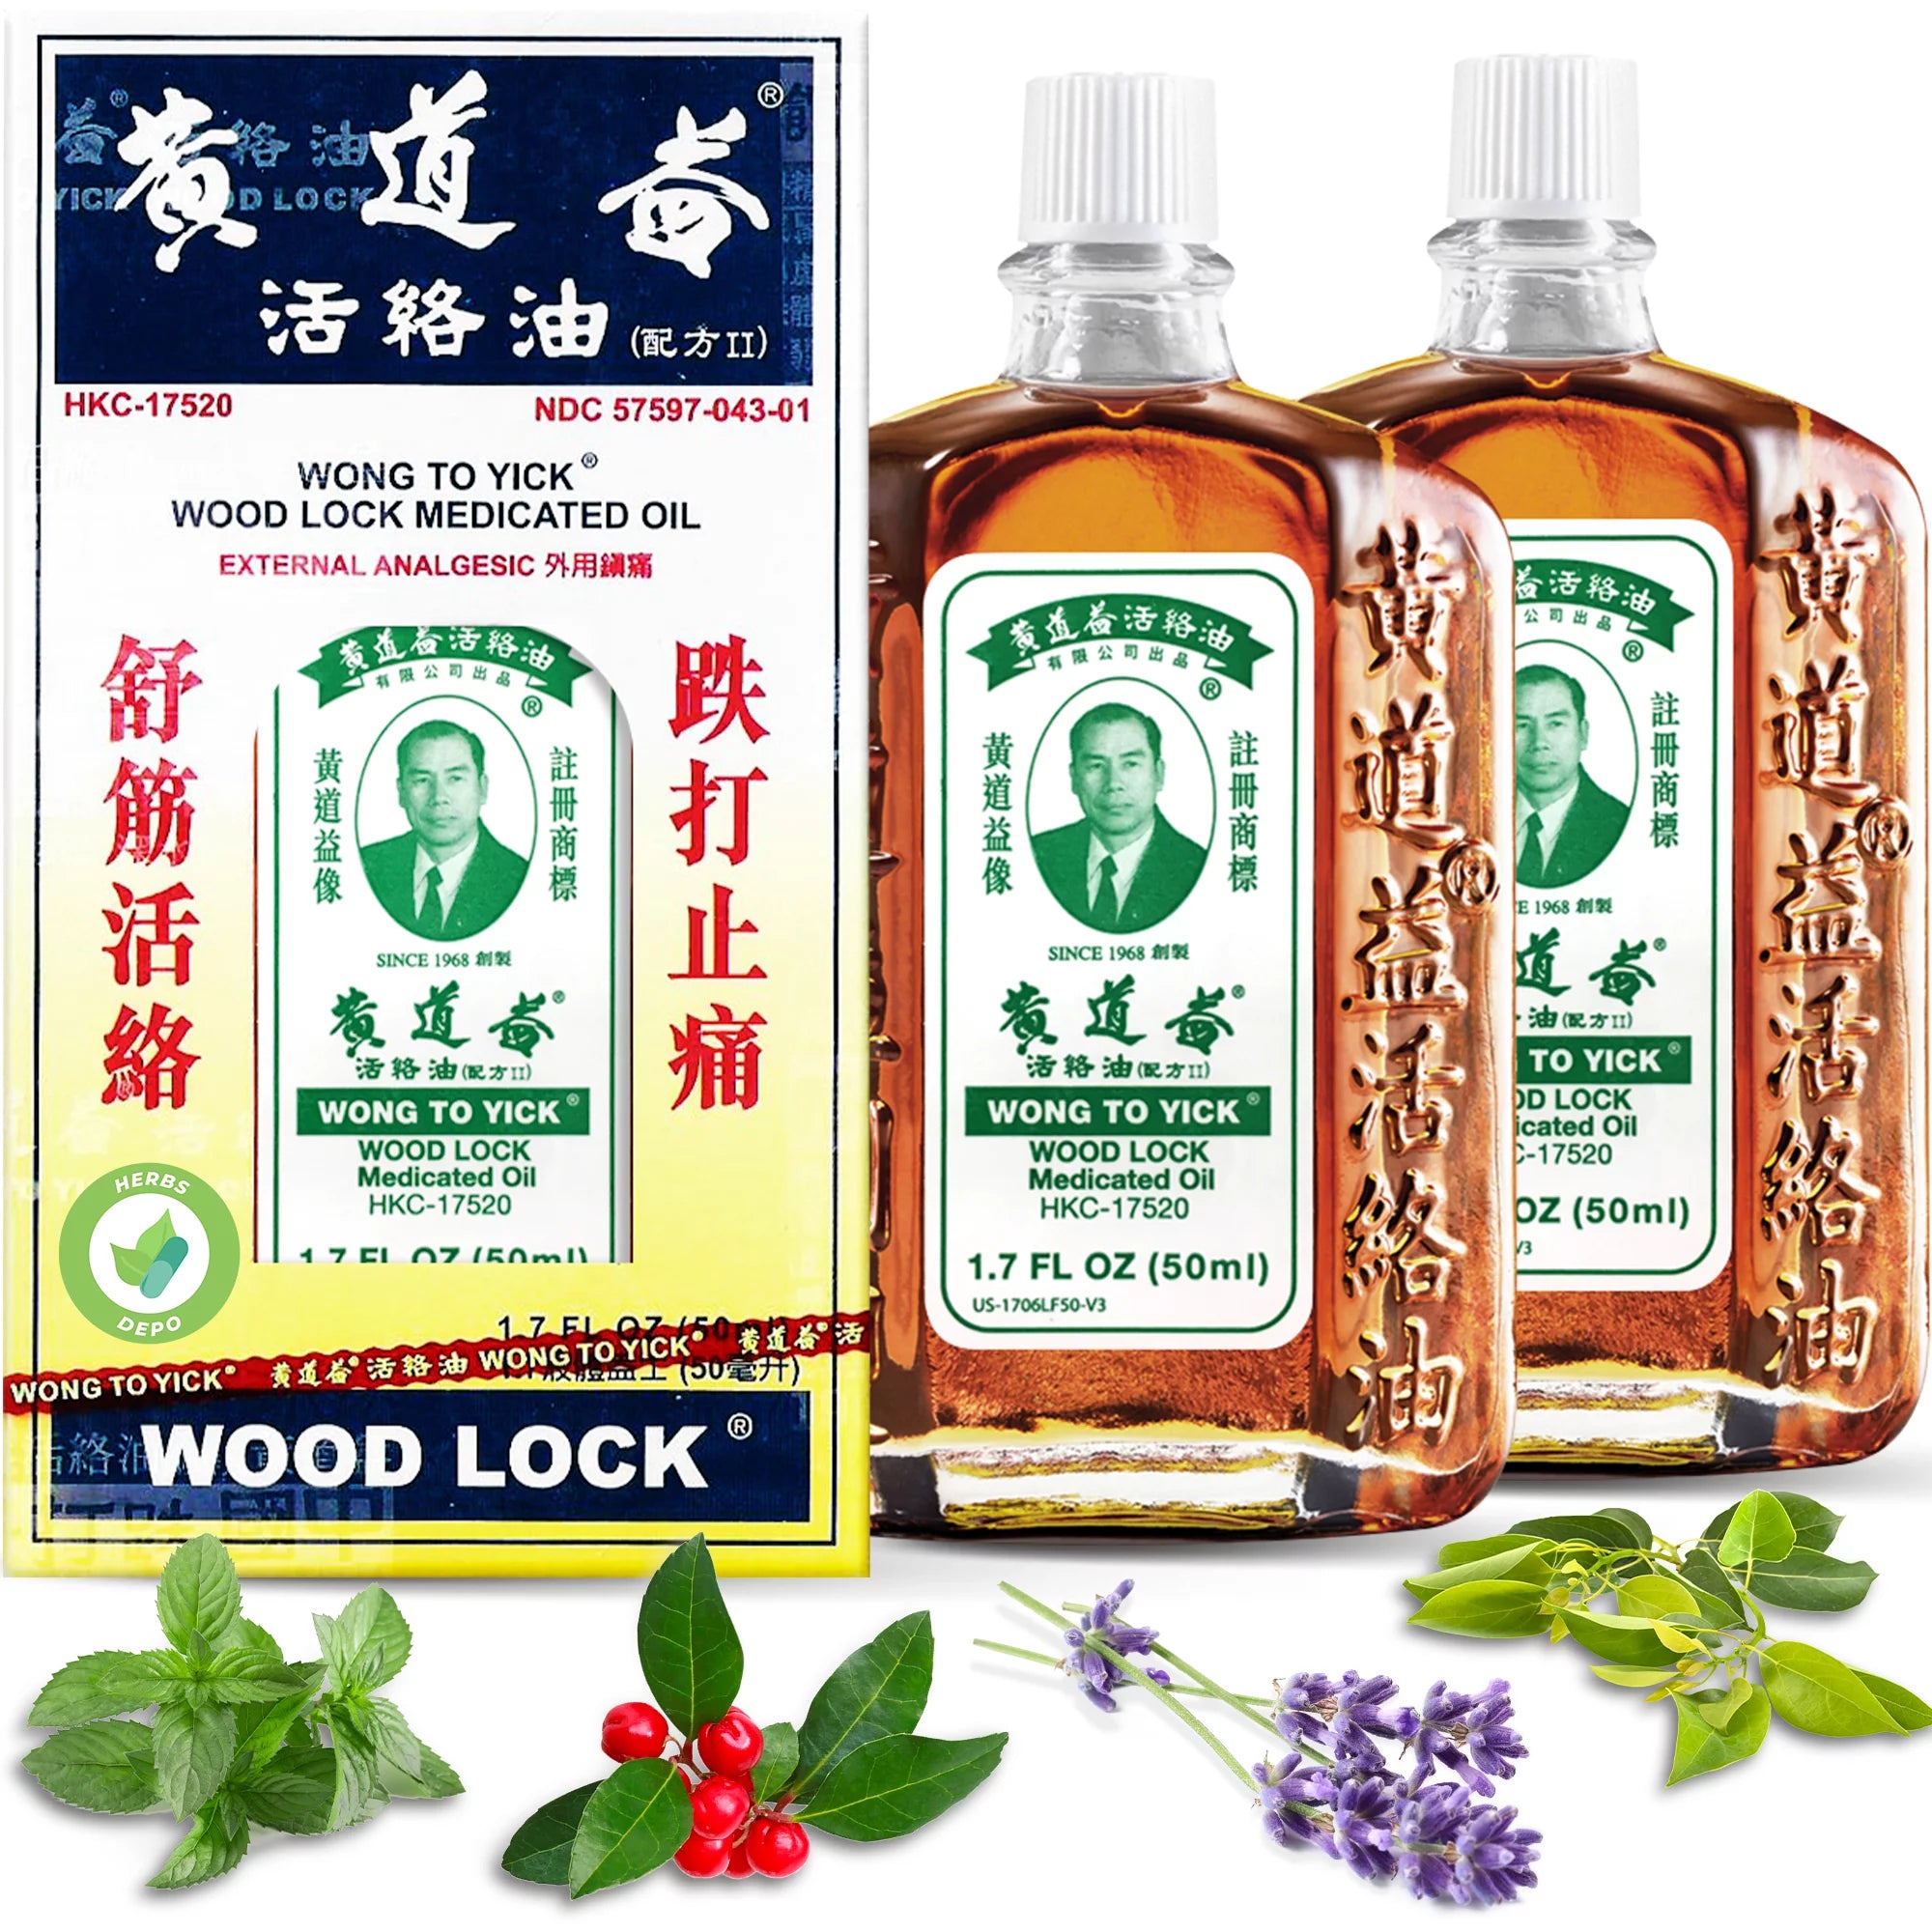 Wong To Yick Wood Lock Oil (2 packs)